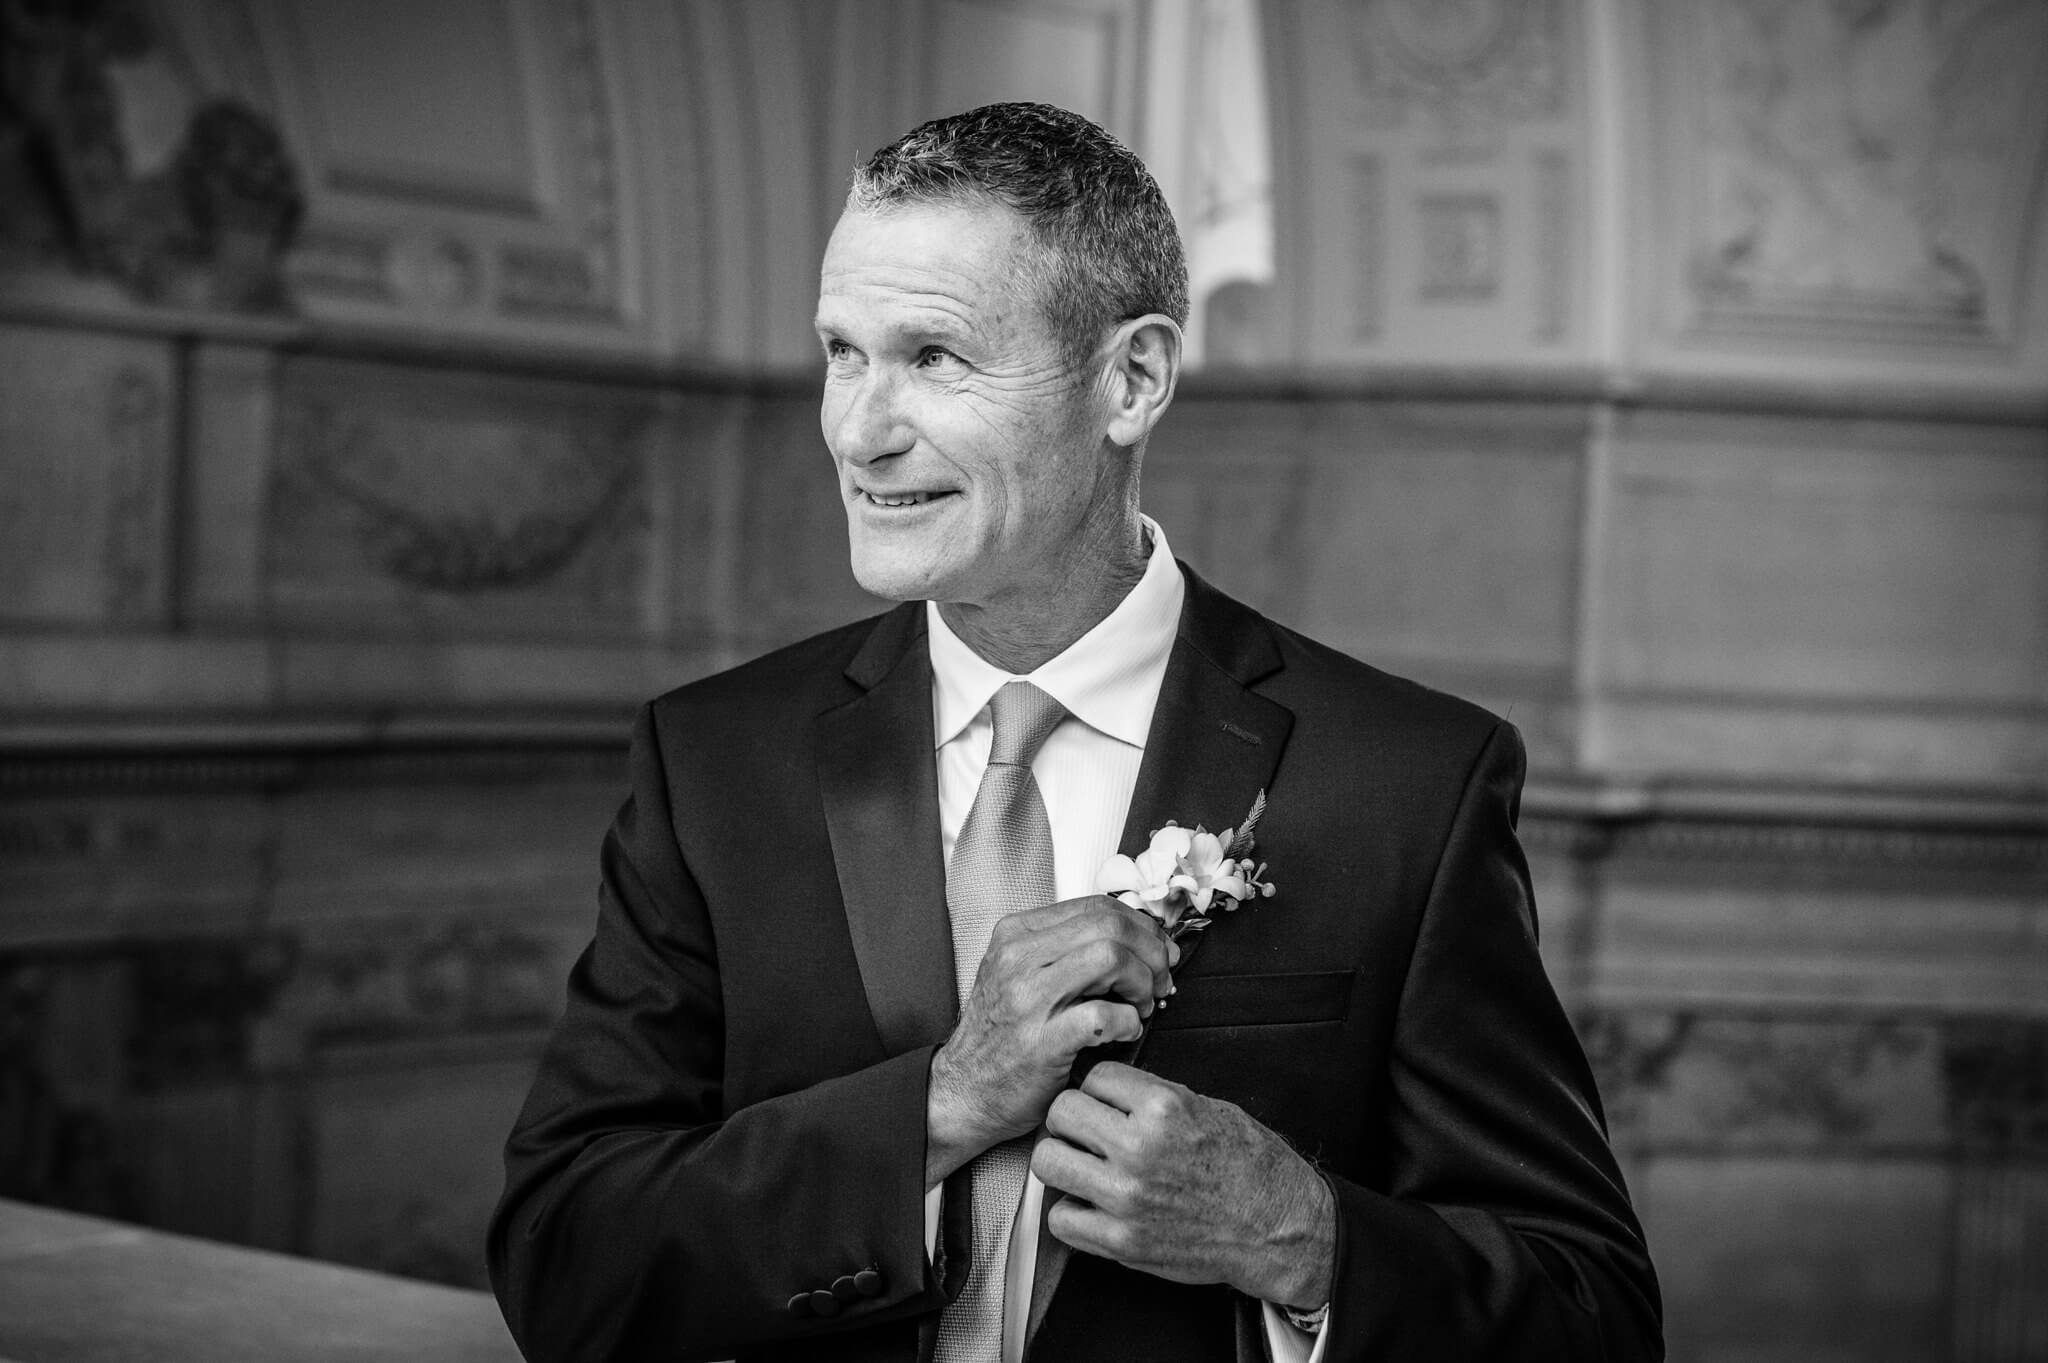 Black and white photo of man smiling and adjusting boutonniere at a wedding